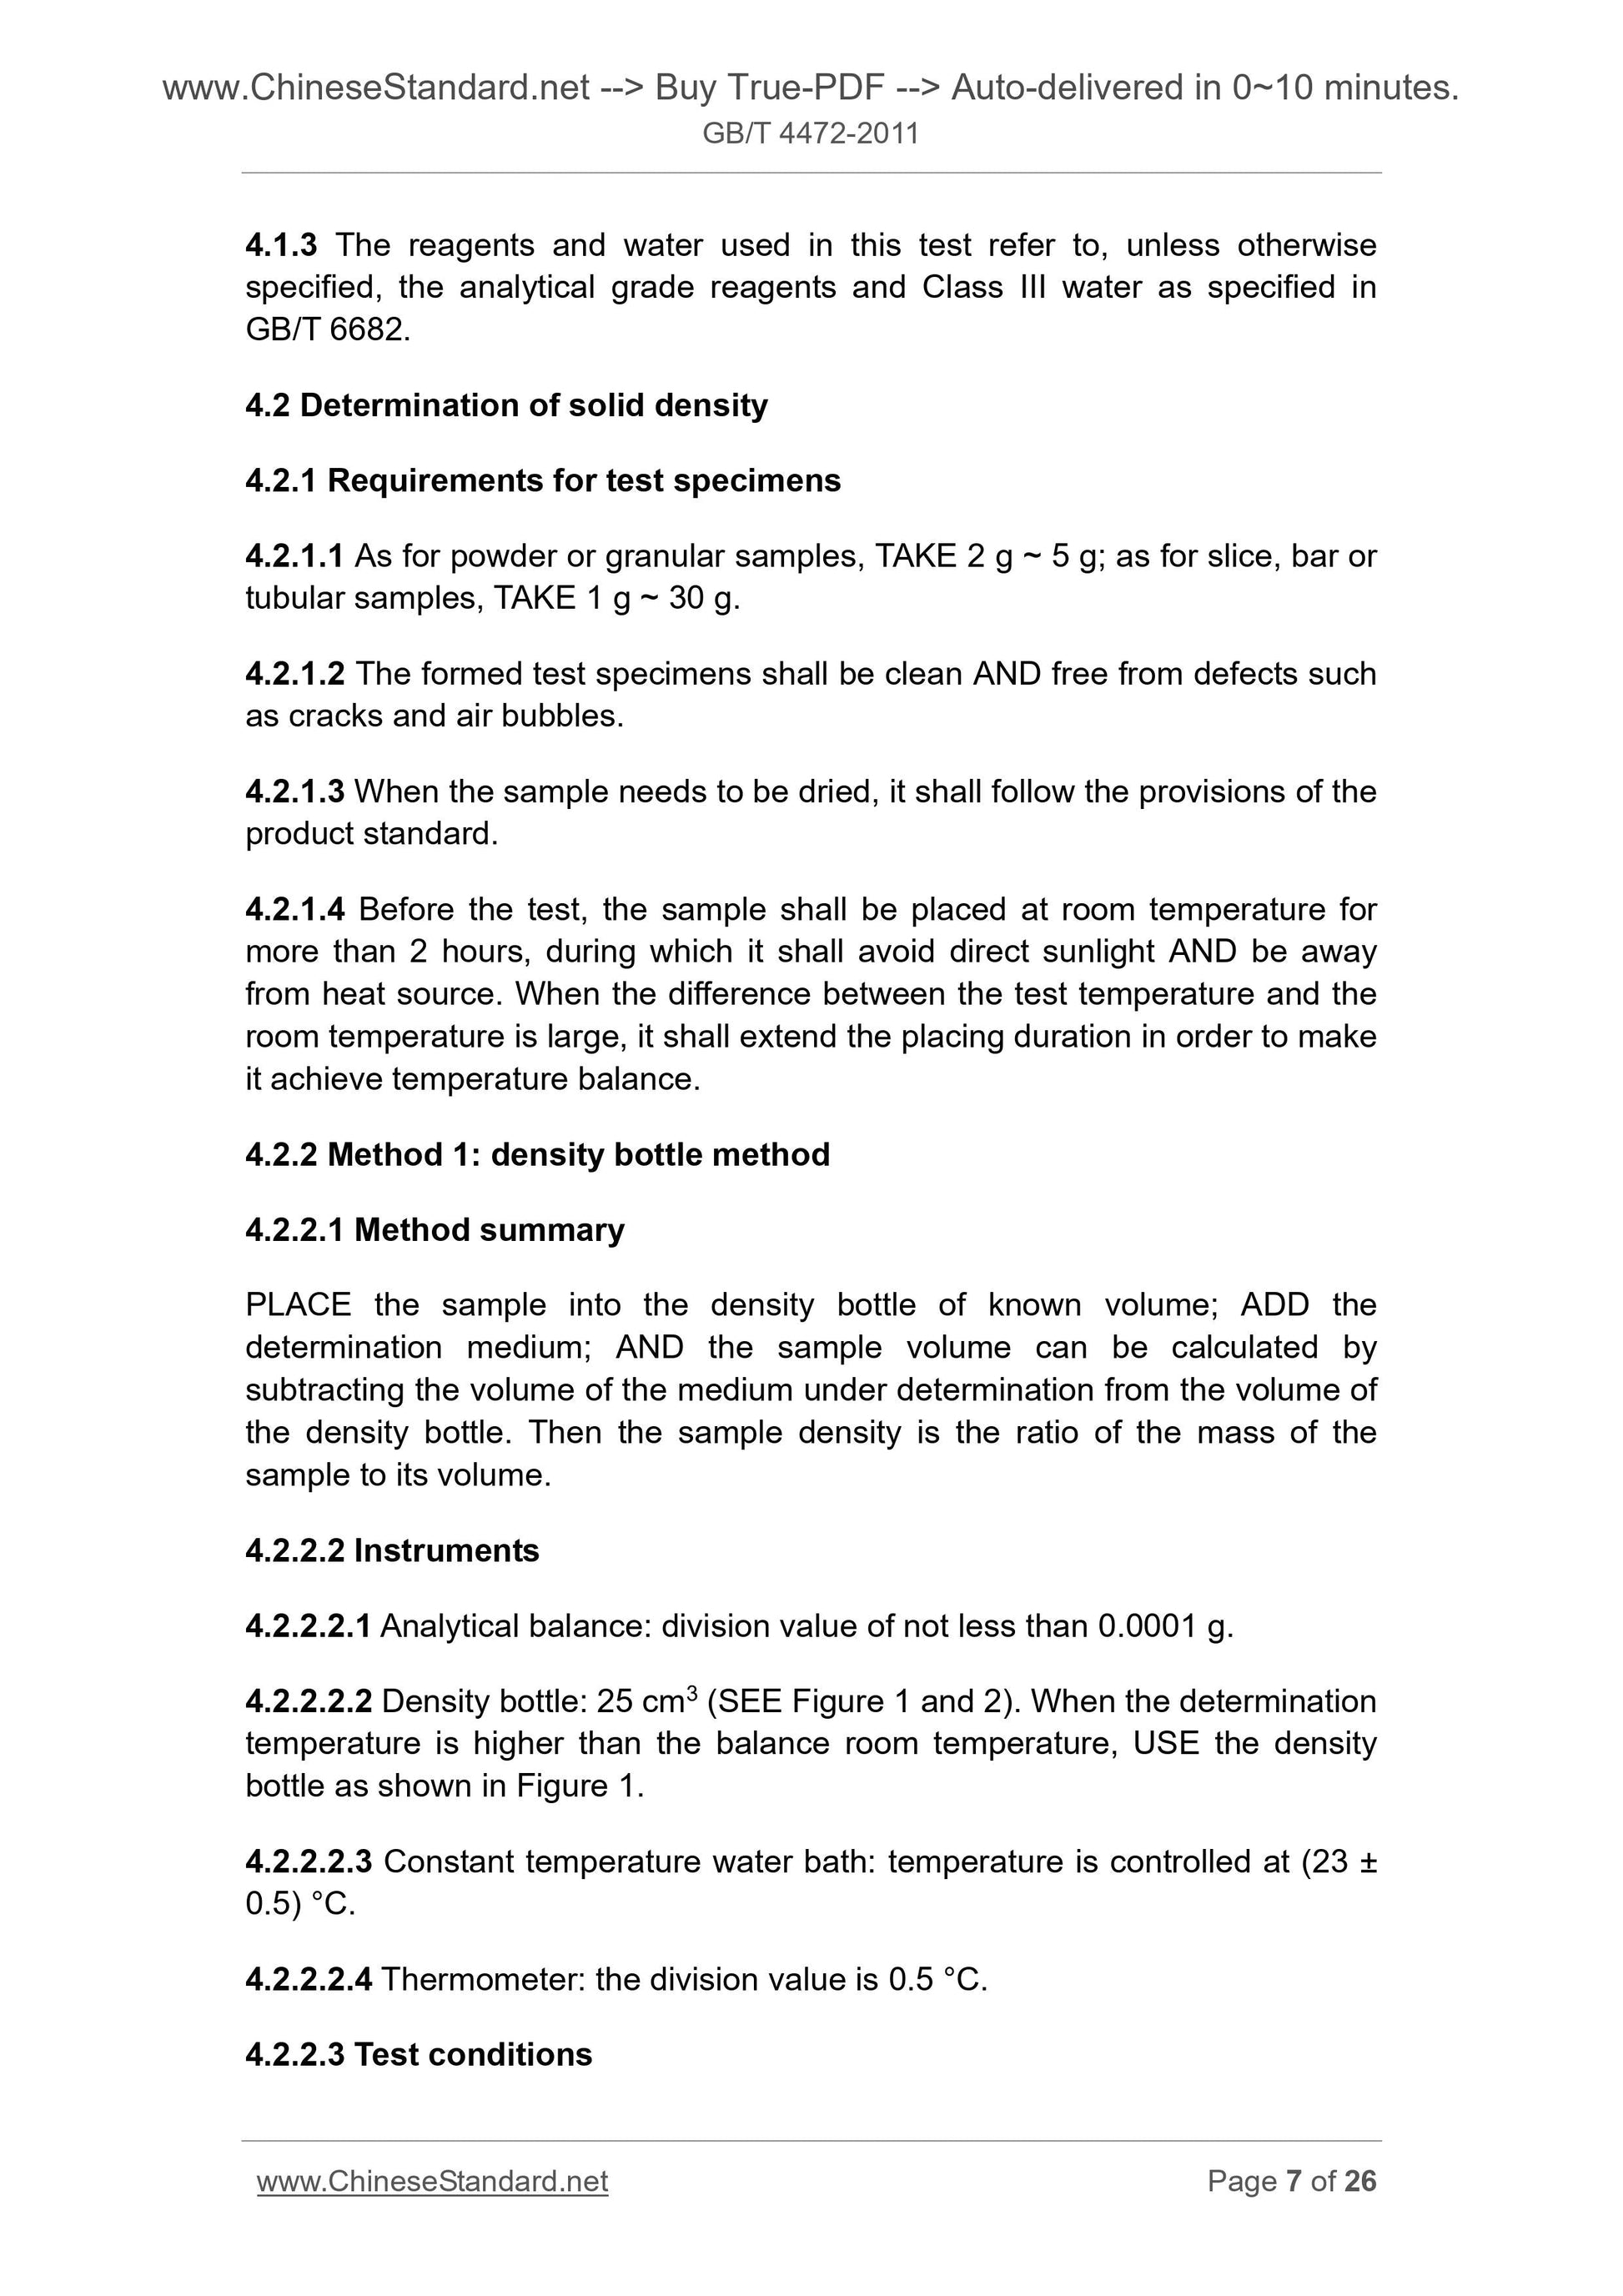 GB/T 4472-2011 Page 5